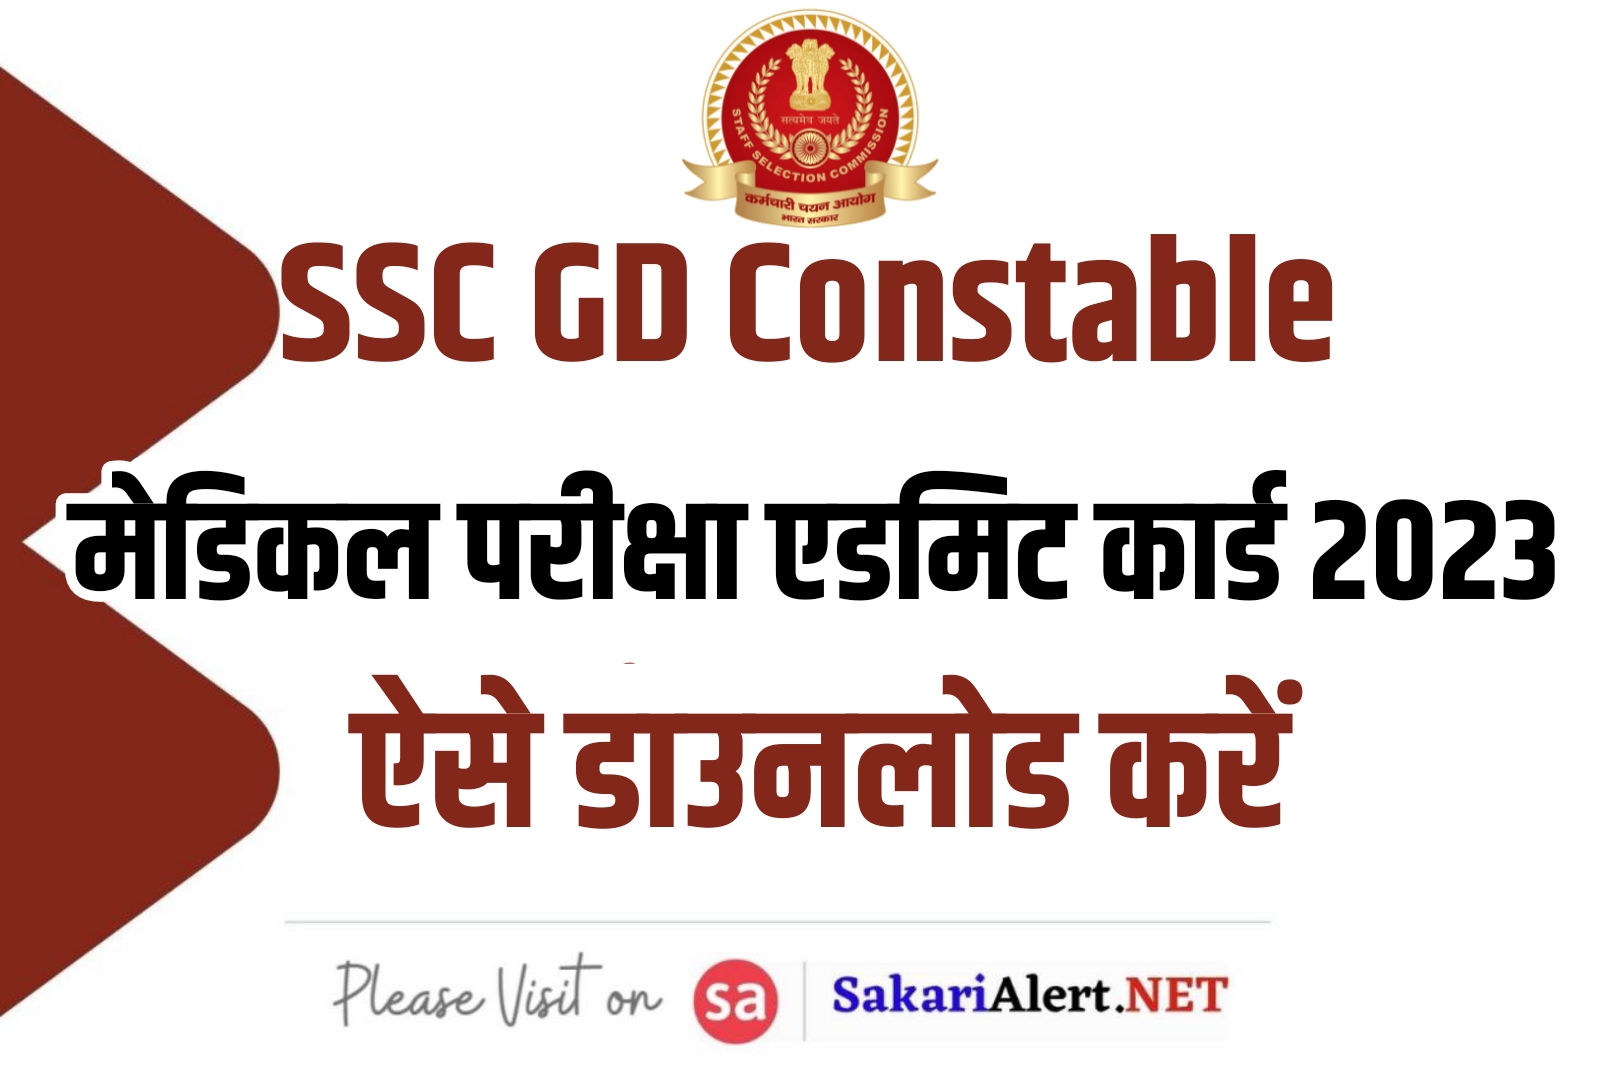 SSC GD Constable DME Admit Card 2023